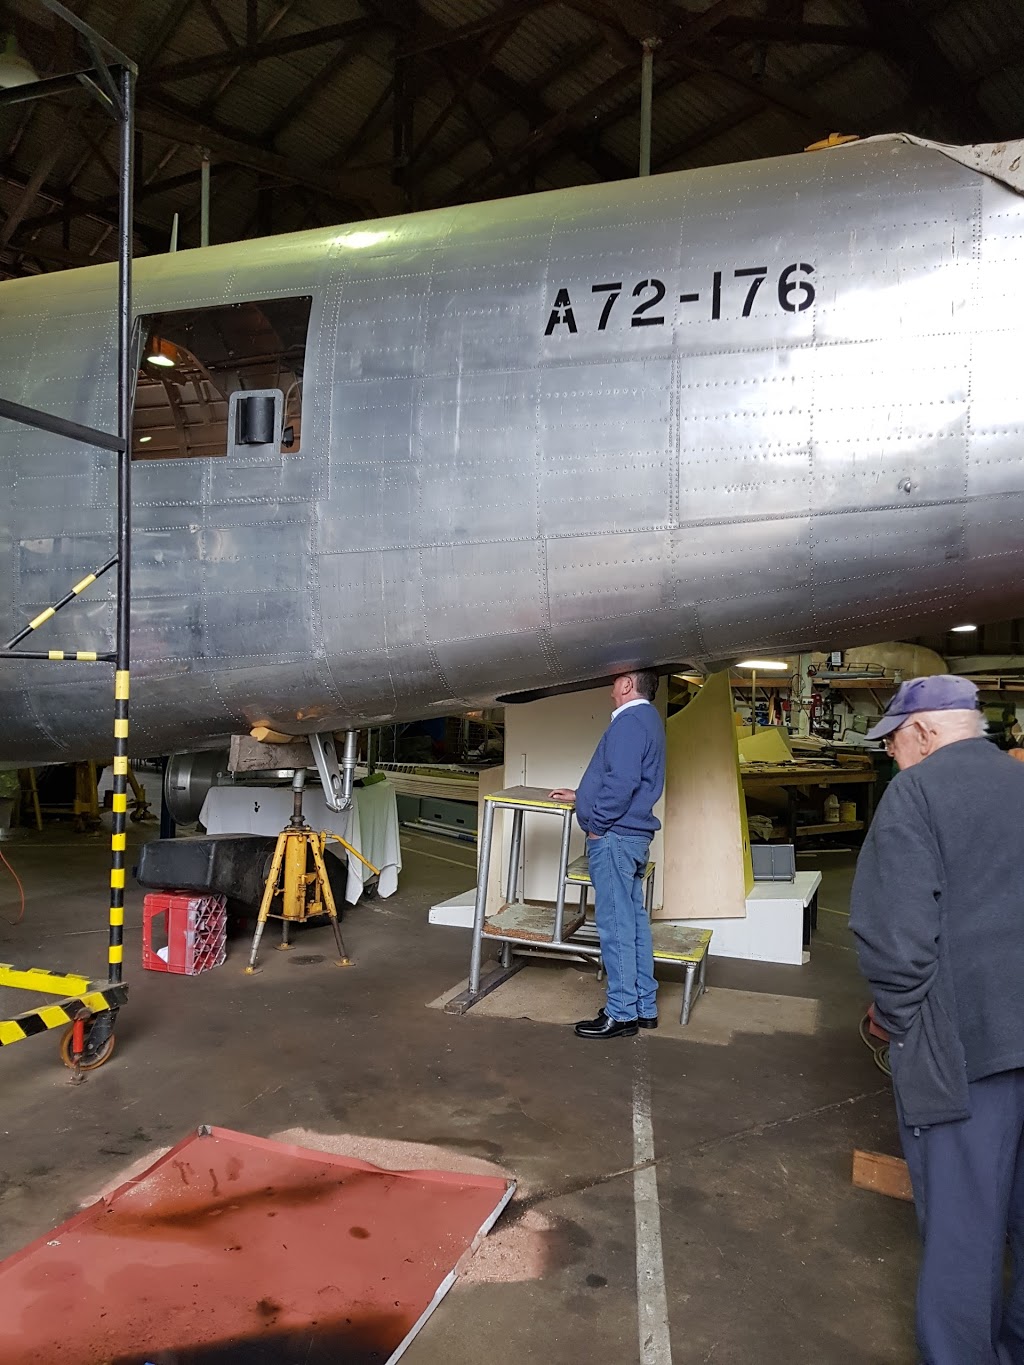 Liberator Restoration Project And Museum | museum | Werribee South VIC 3030, Australia